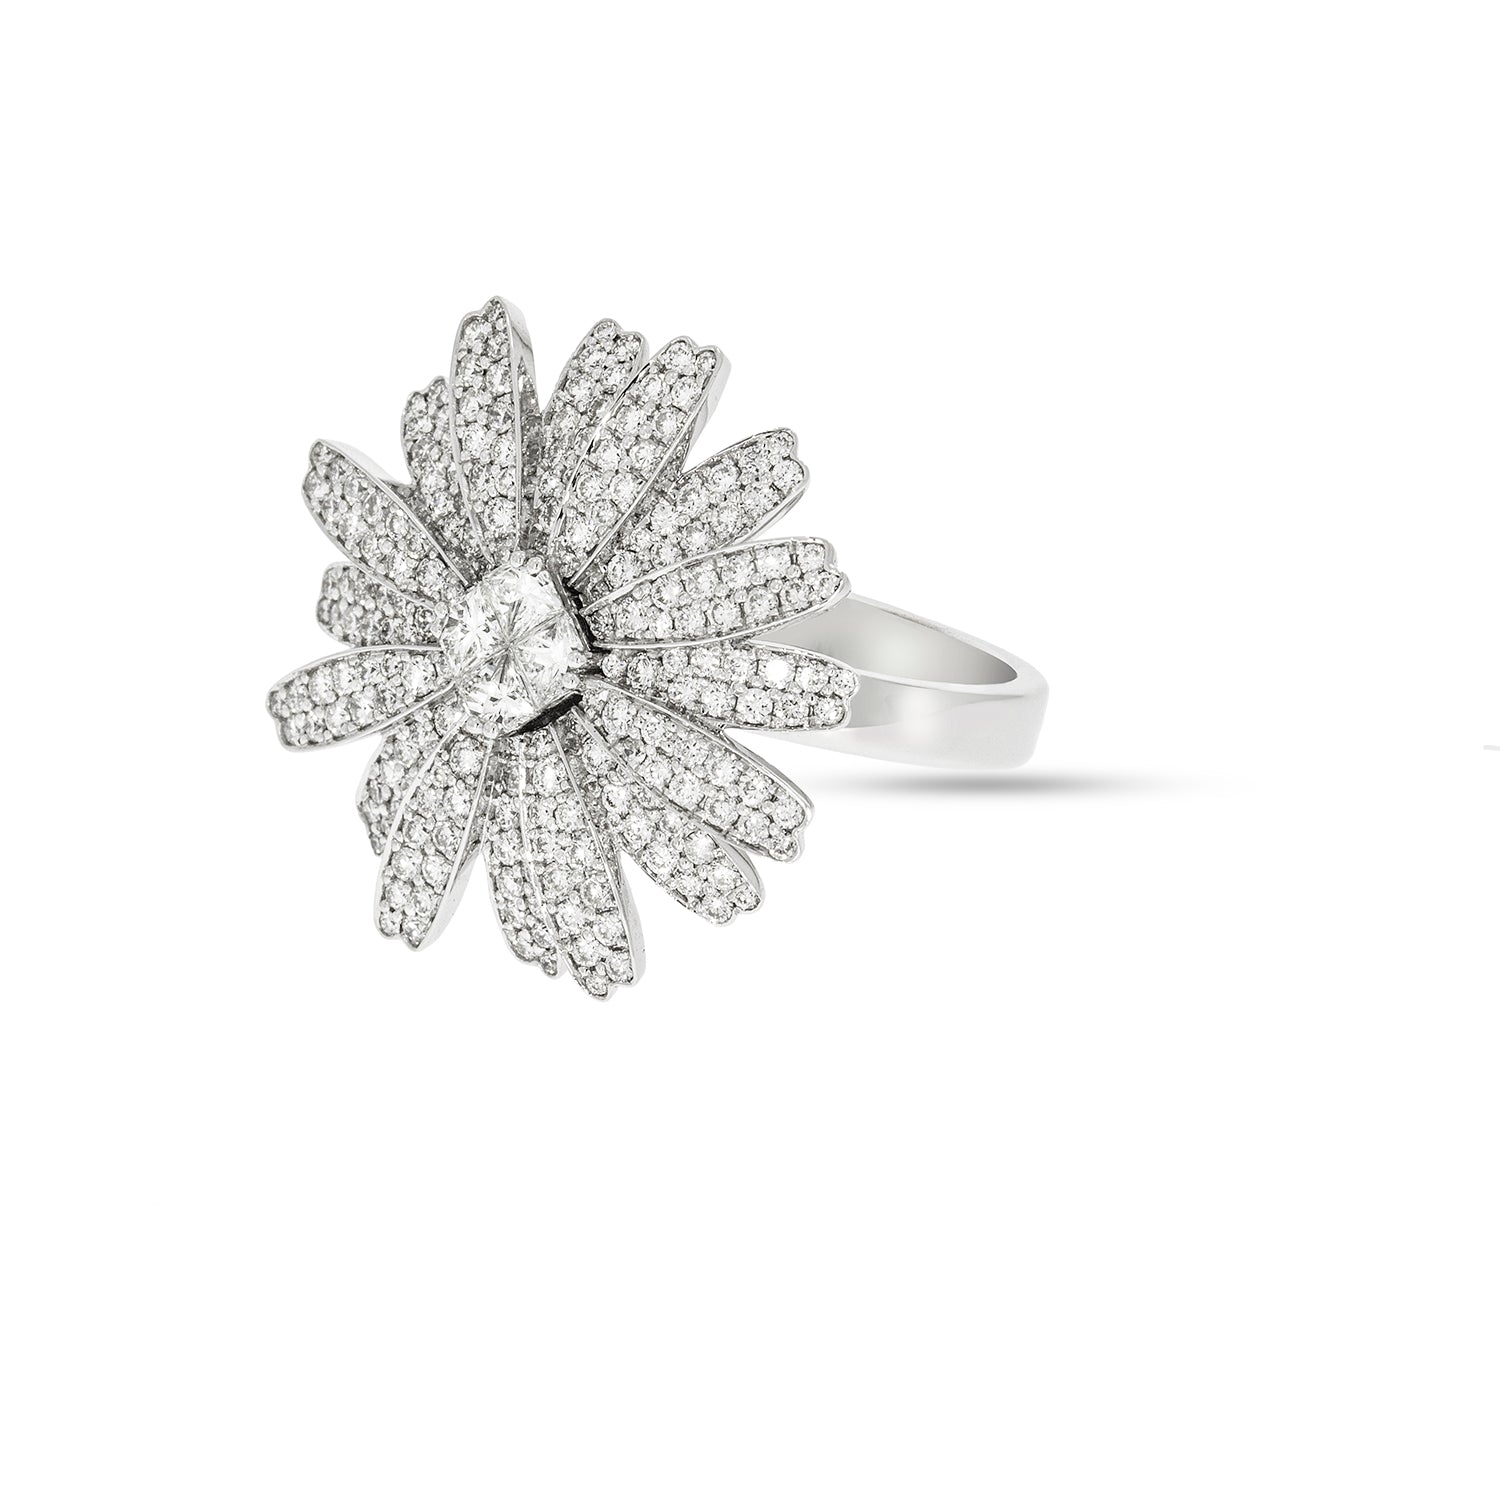 Buy Flower Diamond Ring Designs Online in India | Candere by Kalyan  Jewellers